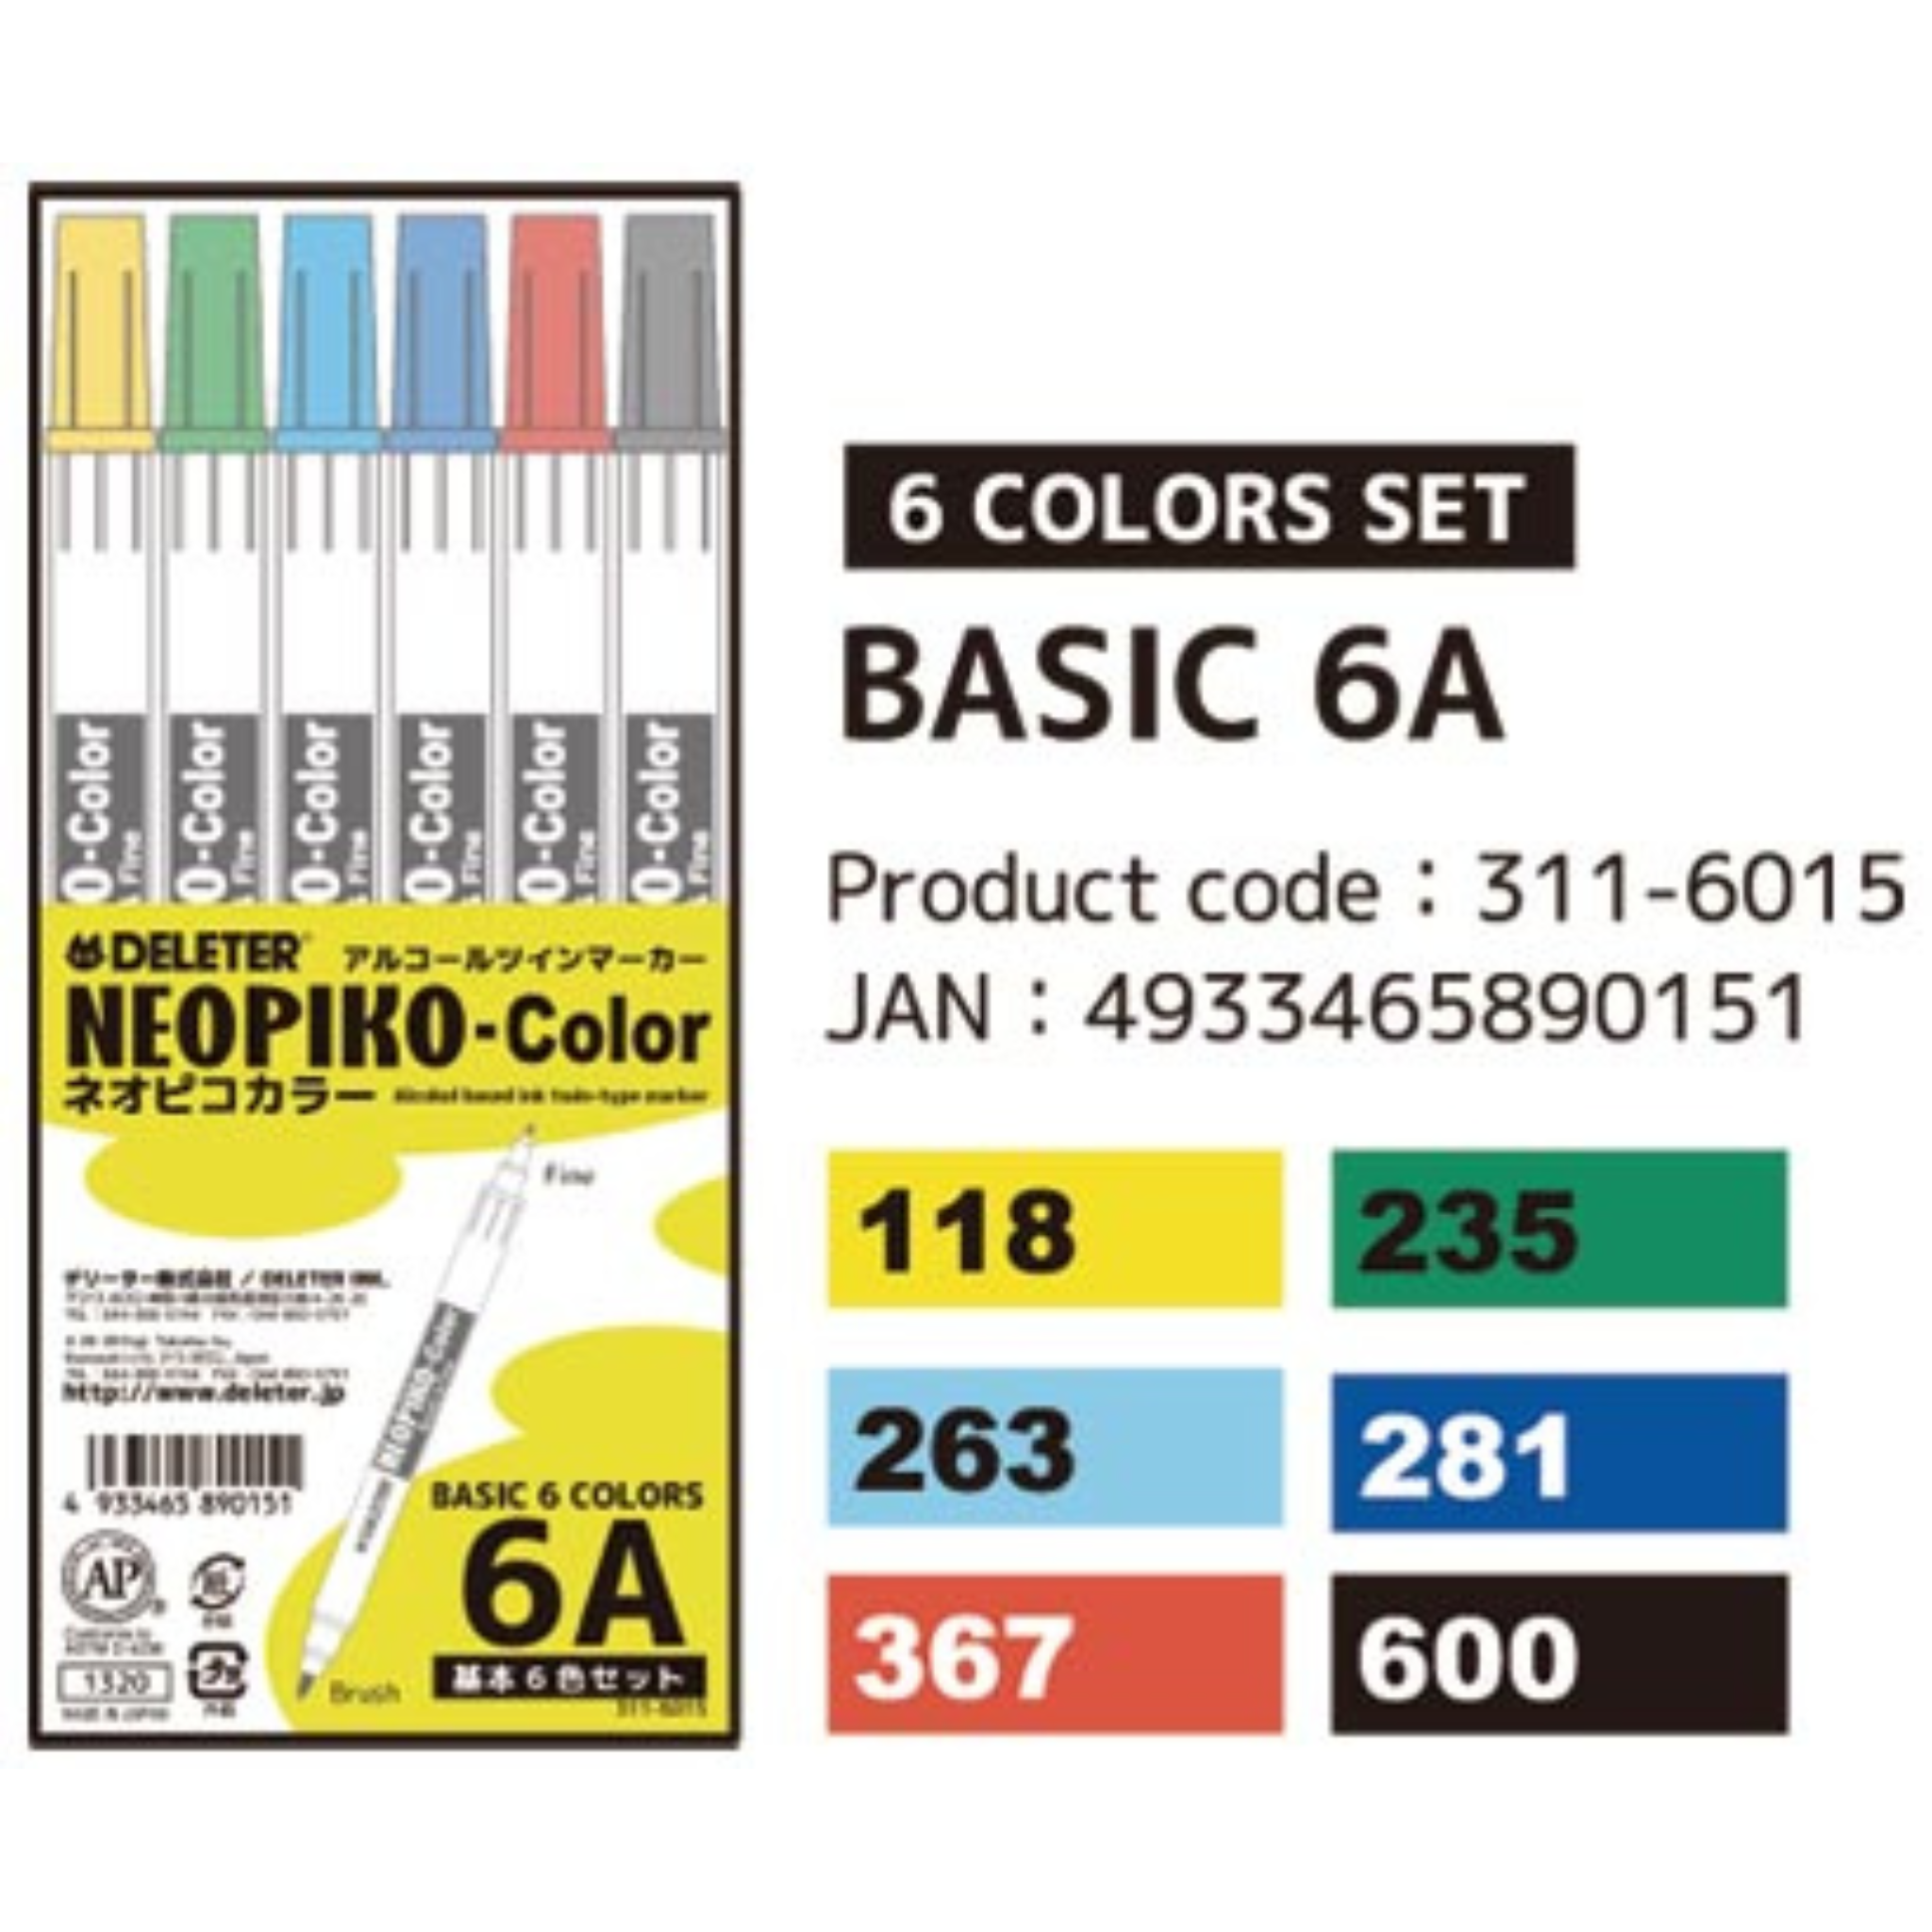 DELETER Neopiko Color, Basic 6 colors set